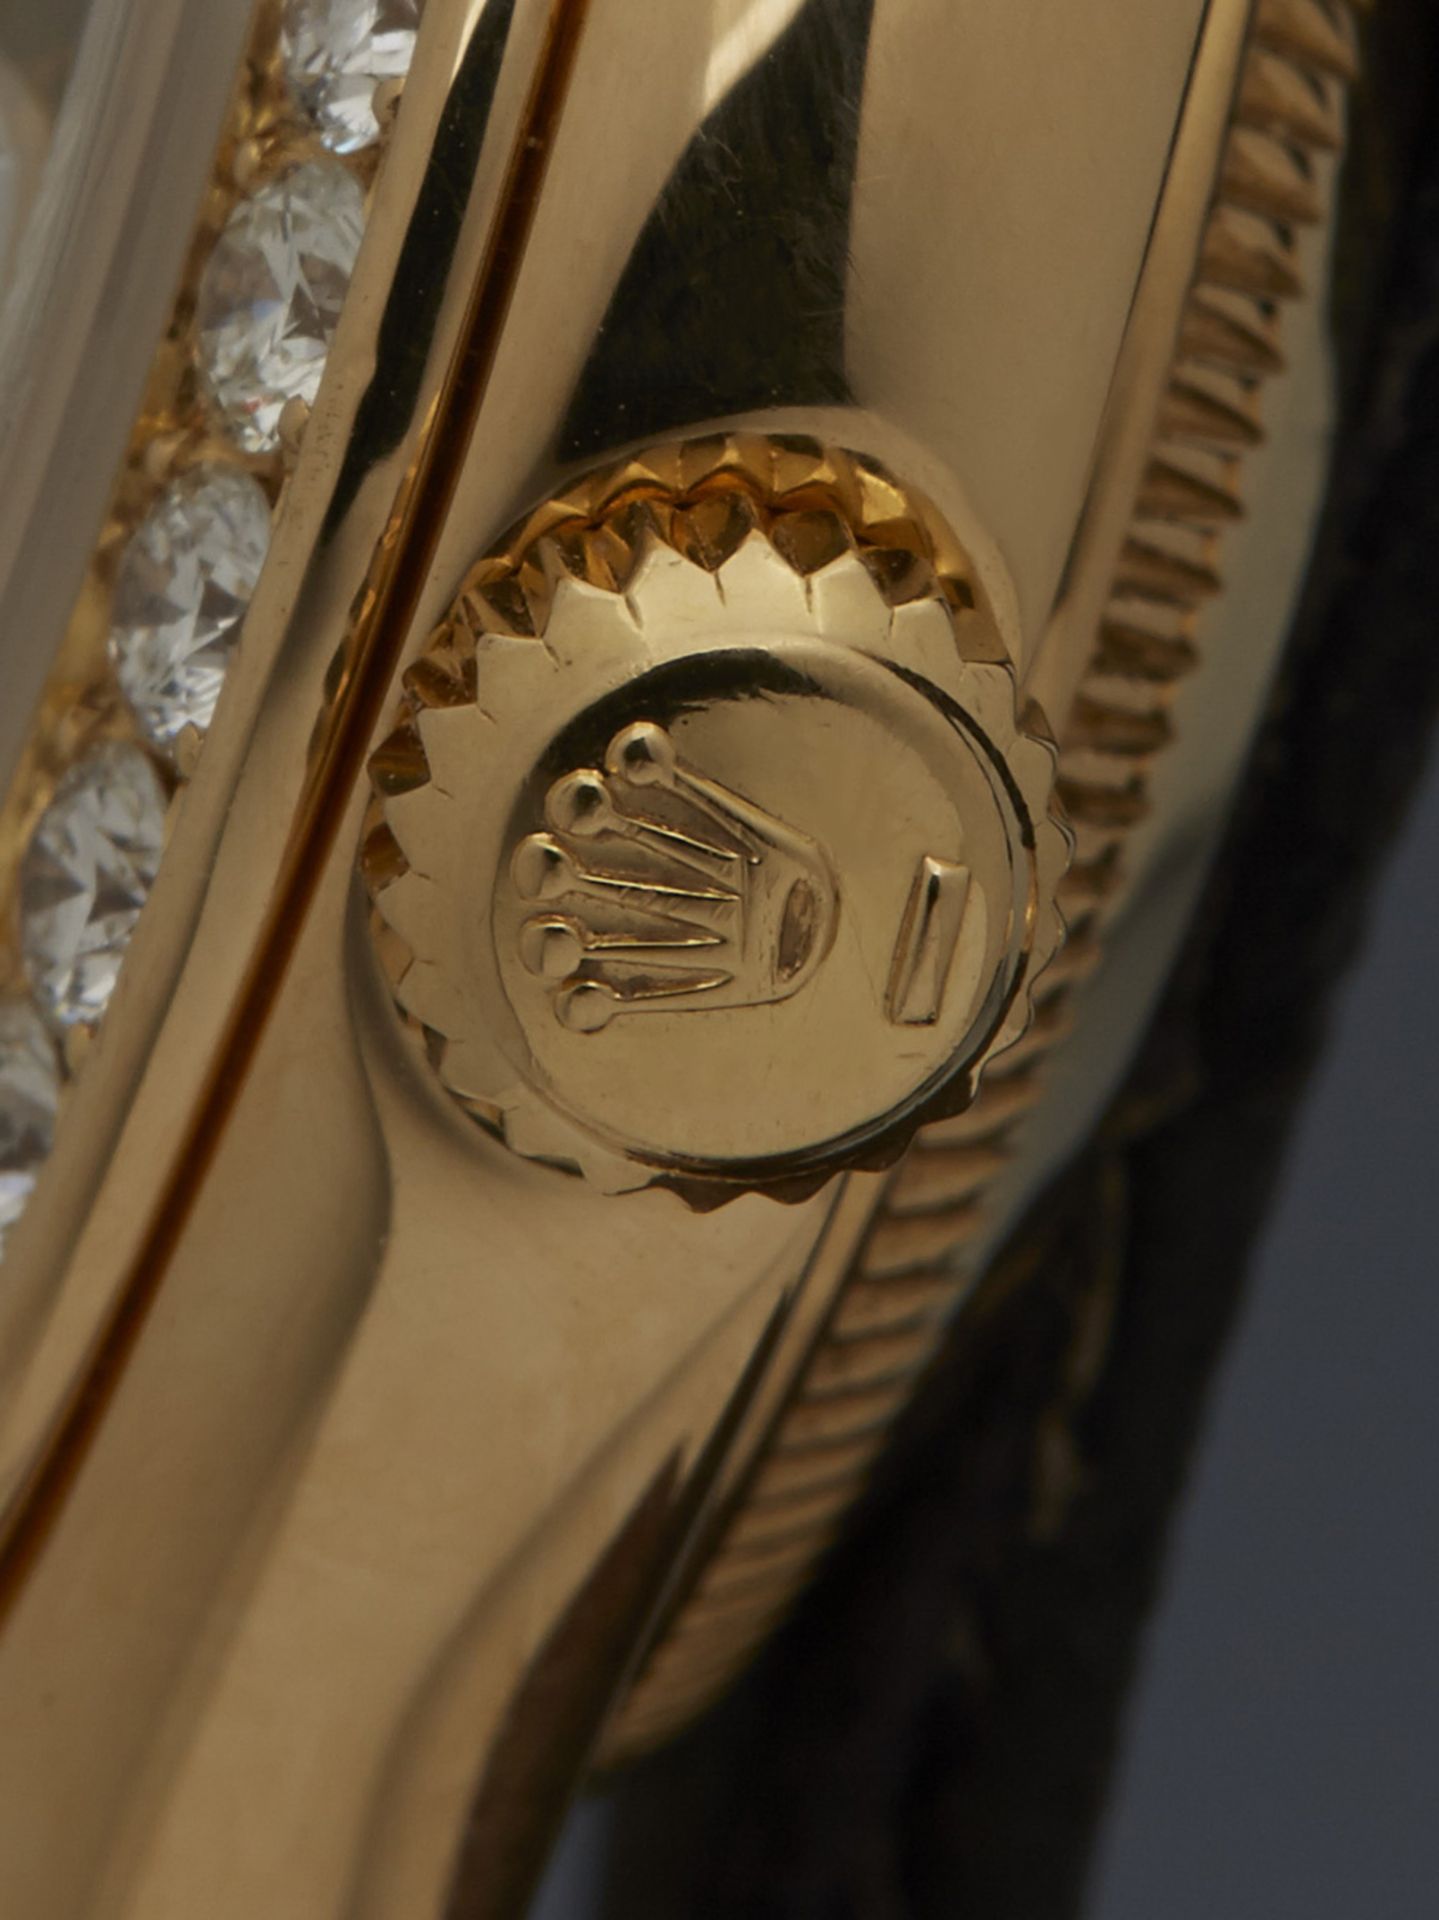 Rolex, Pearlmaster 69298 Diamonds & Precious Gems Limited Edition for the Dubai Royal Family - Image 10 of 11